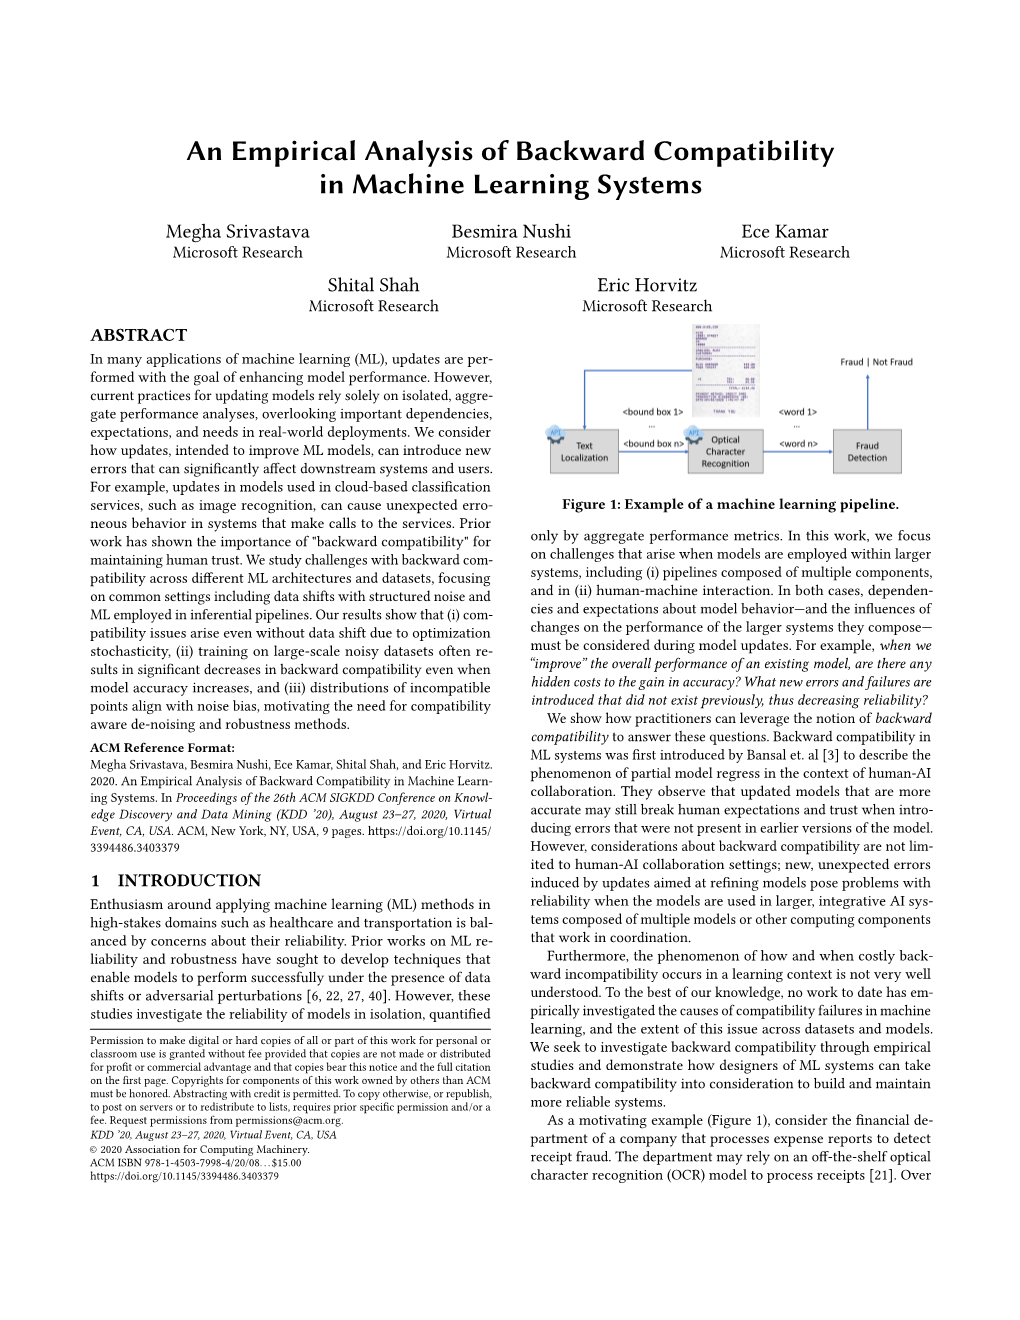 An Empirical Analysis of Backward Compatibility in Machine Learning Systems